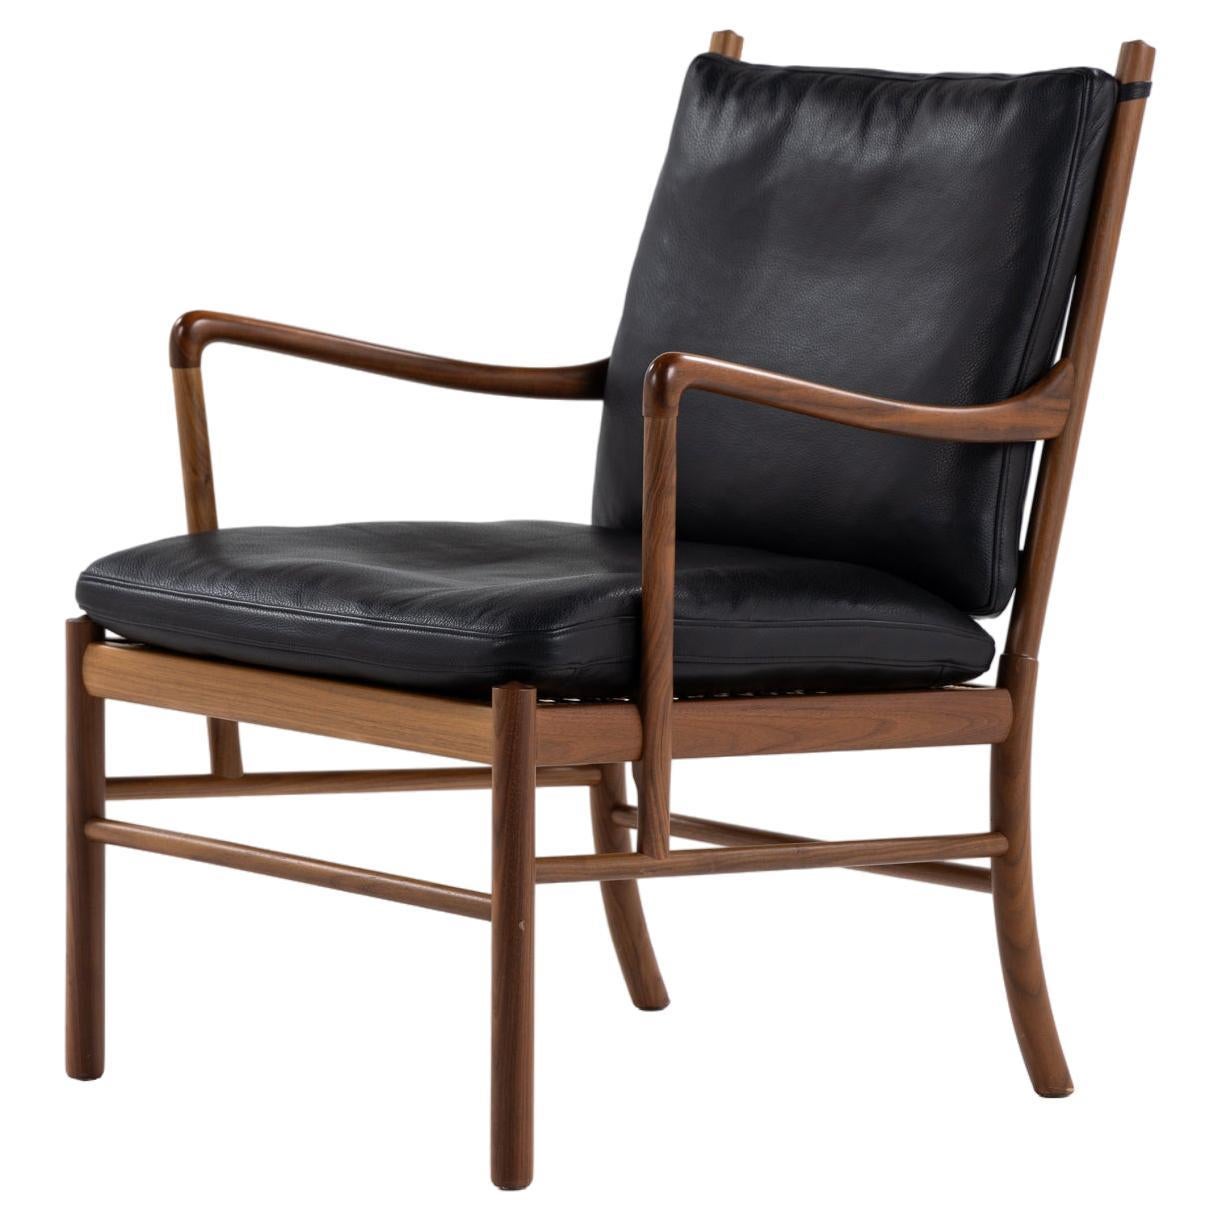 PJ 149 - 'Colonial chair' in black leather and walnut by Ole Wanscher